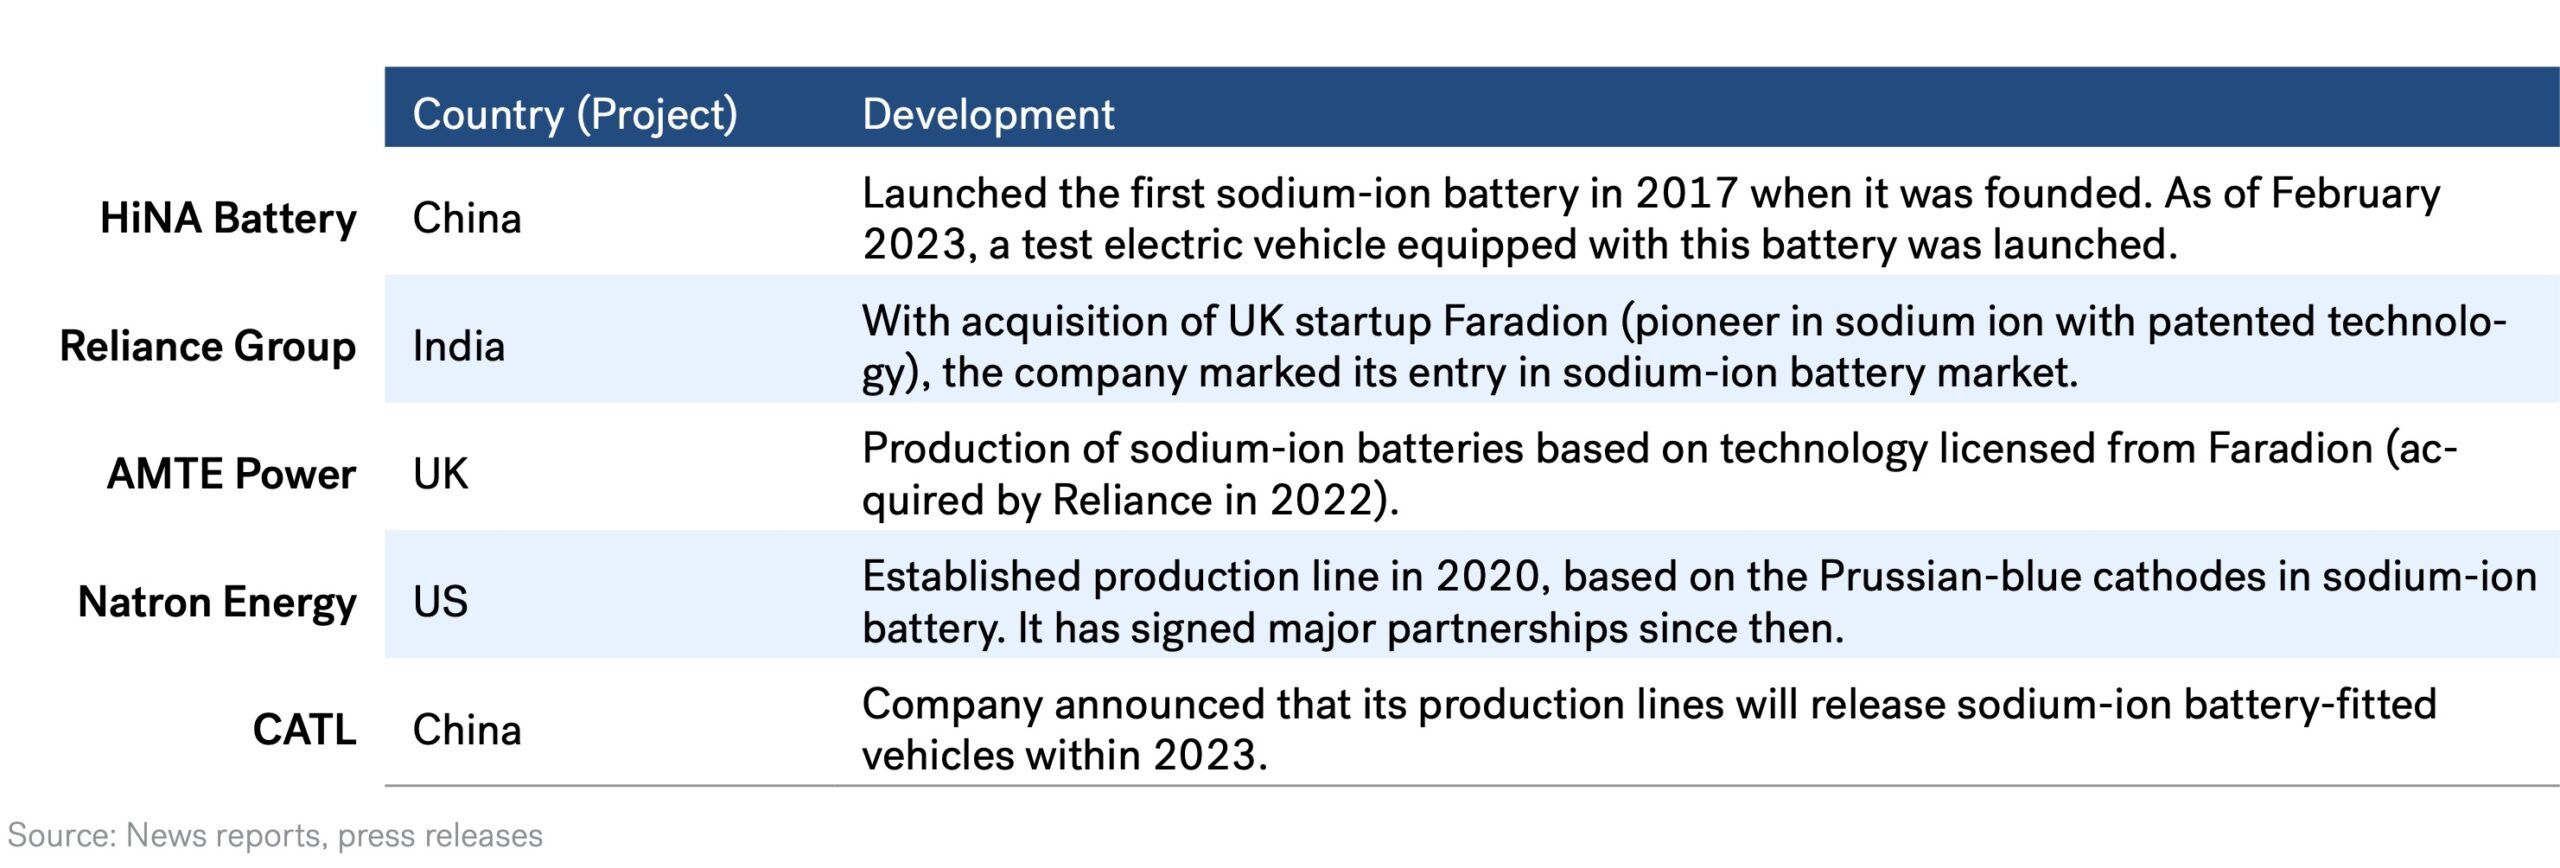 Gigafactory - Major Instances of Sodium-Ion Battery Production and Commercialization